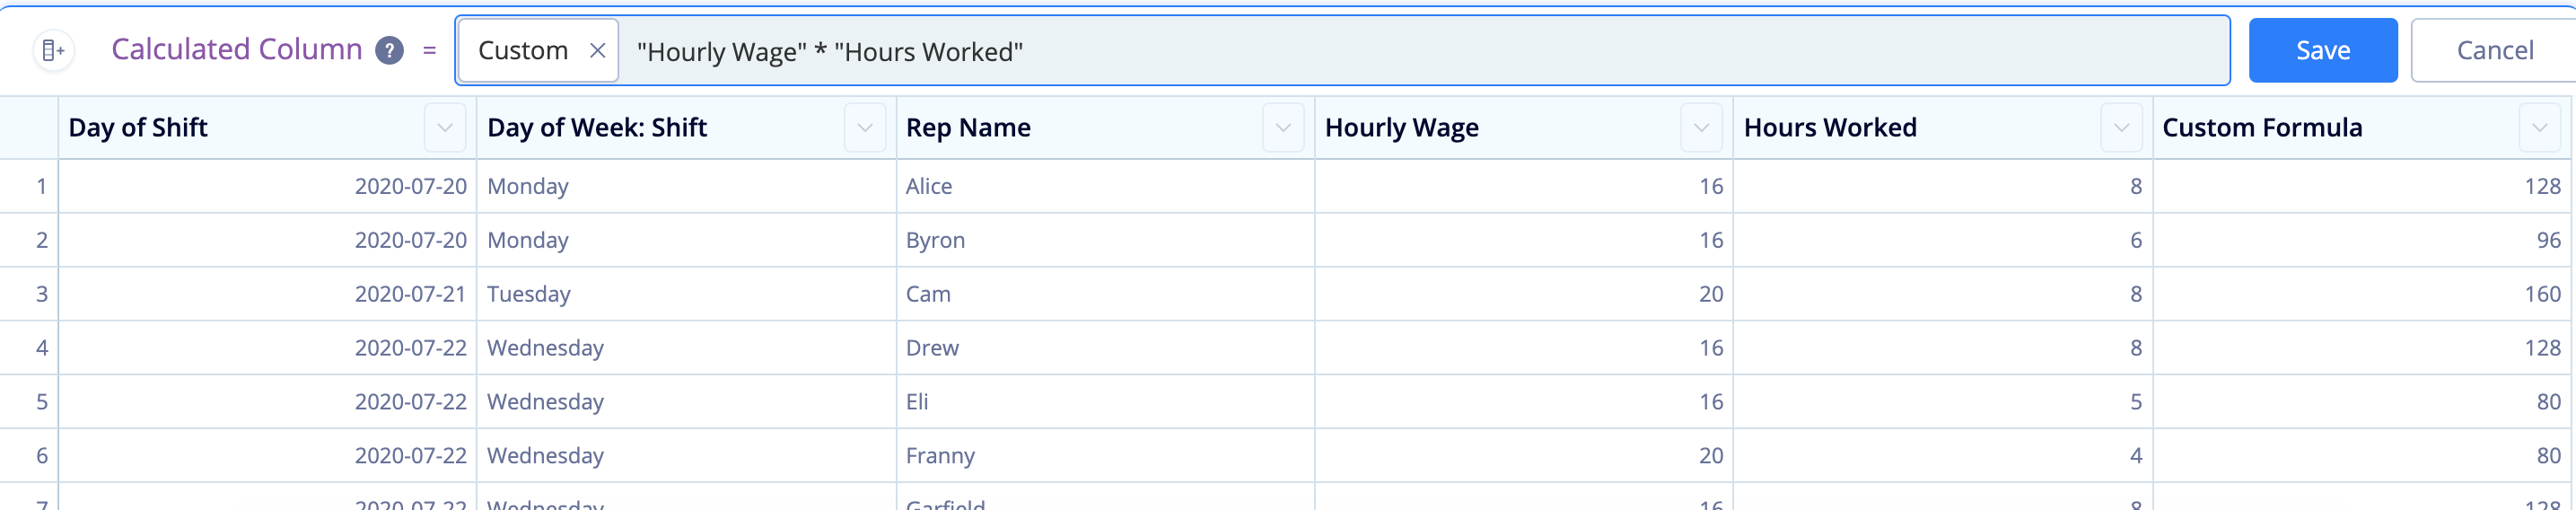 Get the base pay by multiplying the Hourly Wage and the Hours Worked